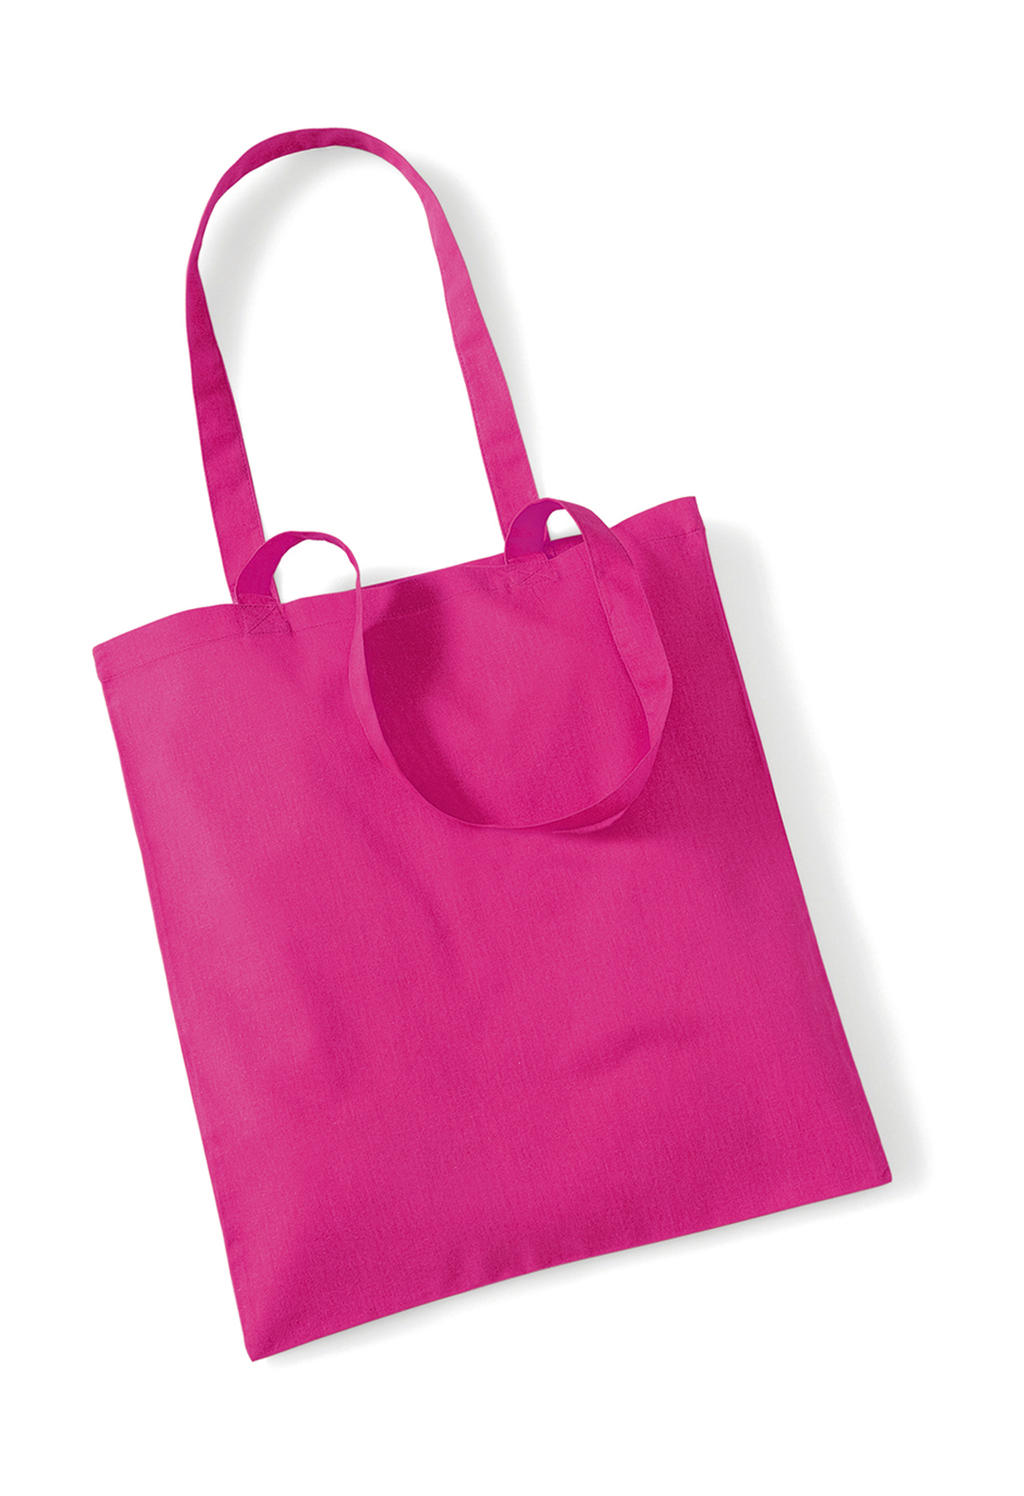  Bag for Life - Long Handles in Farbe Fuchsia